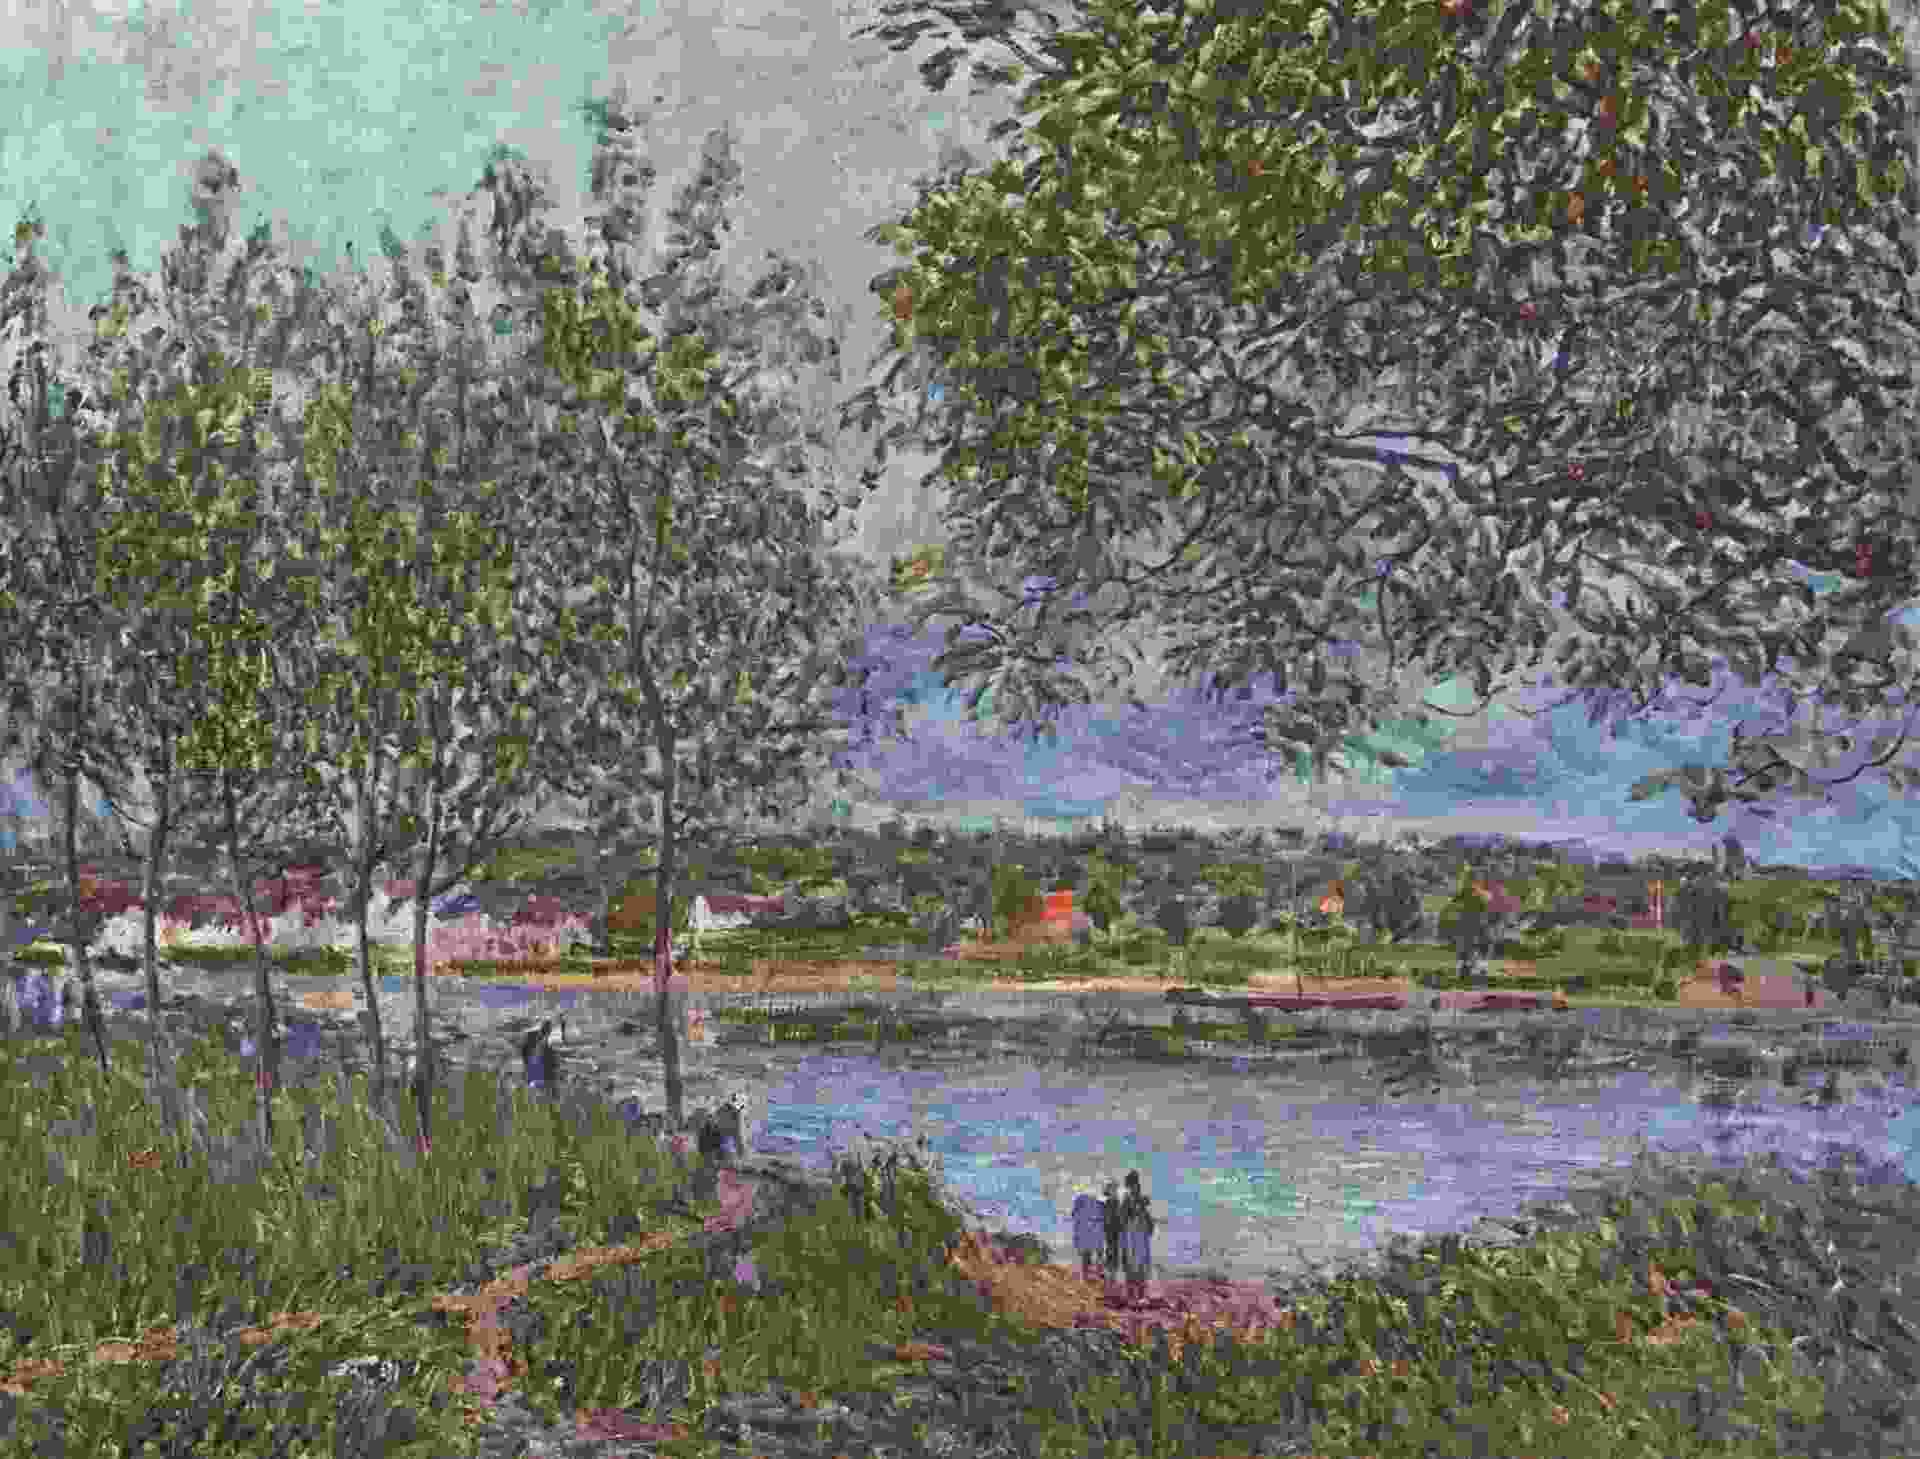 Alfred Sisley was born in 1839 in Paris, France; died in 1899 at Moret-sur-Loing, France.